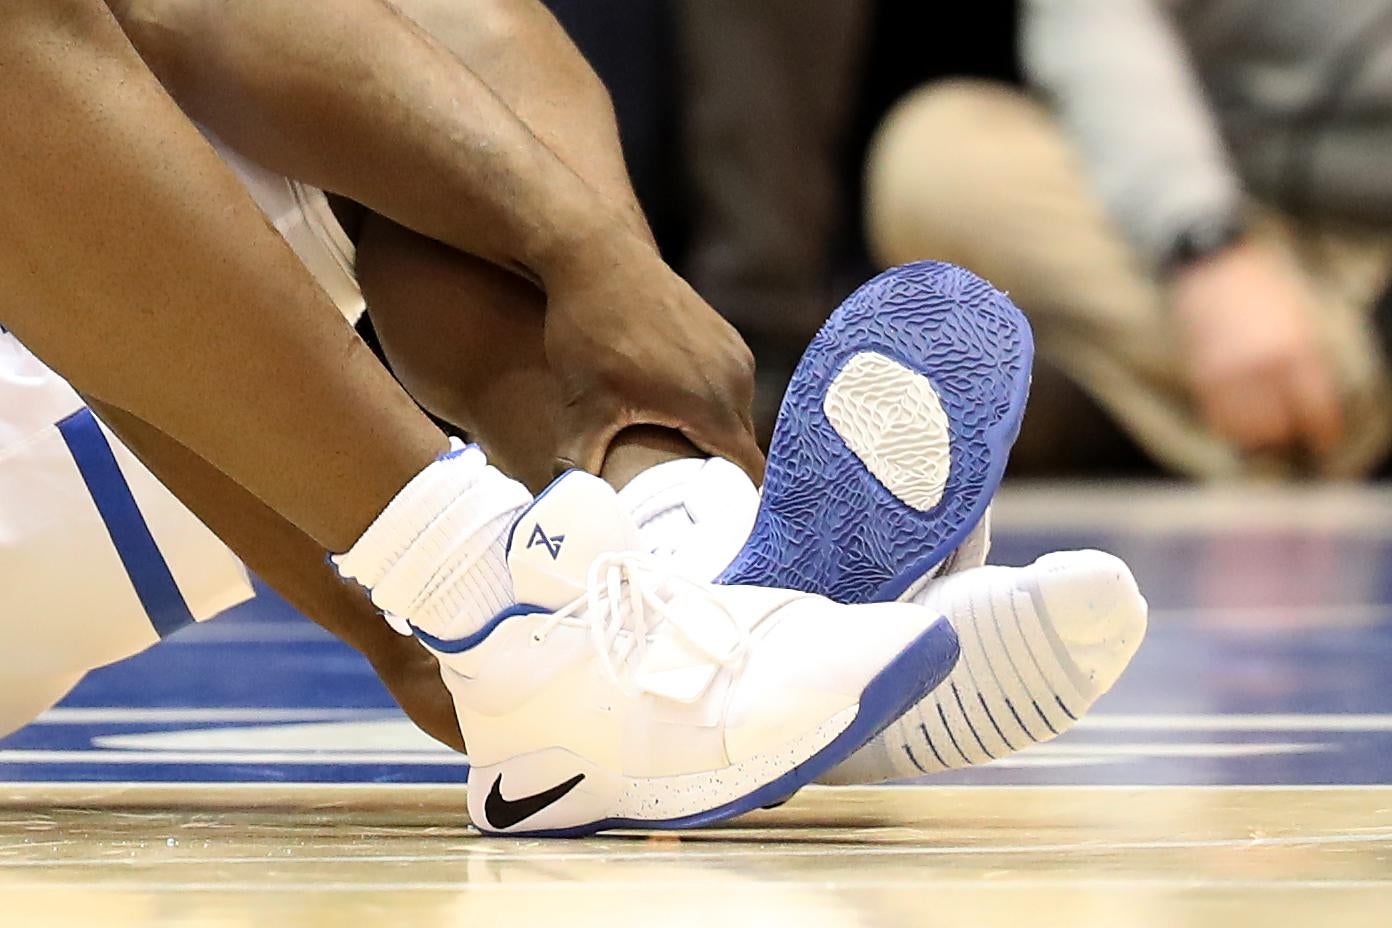 A detailed view of the shoe worn by Zion Williamson.